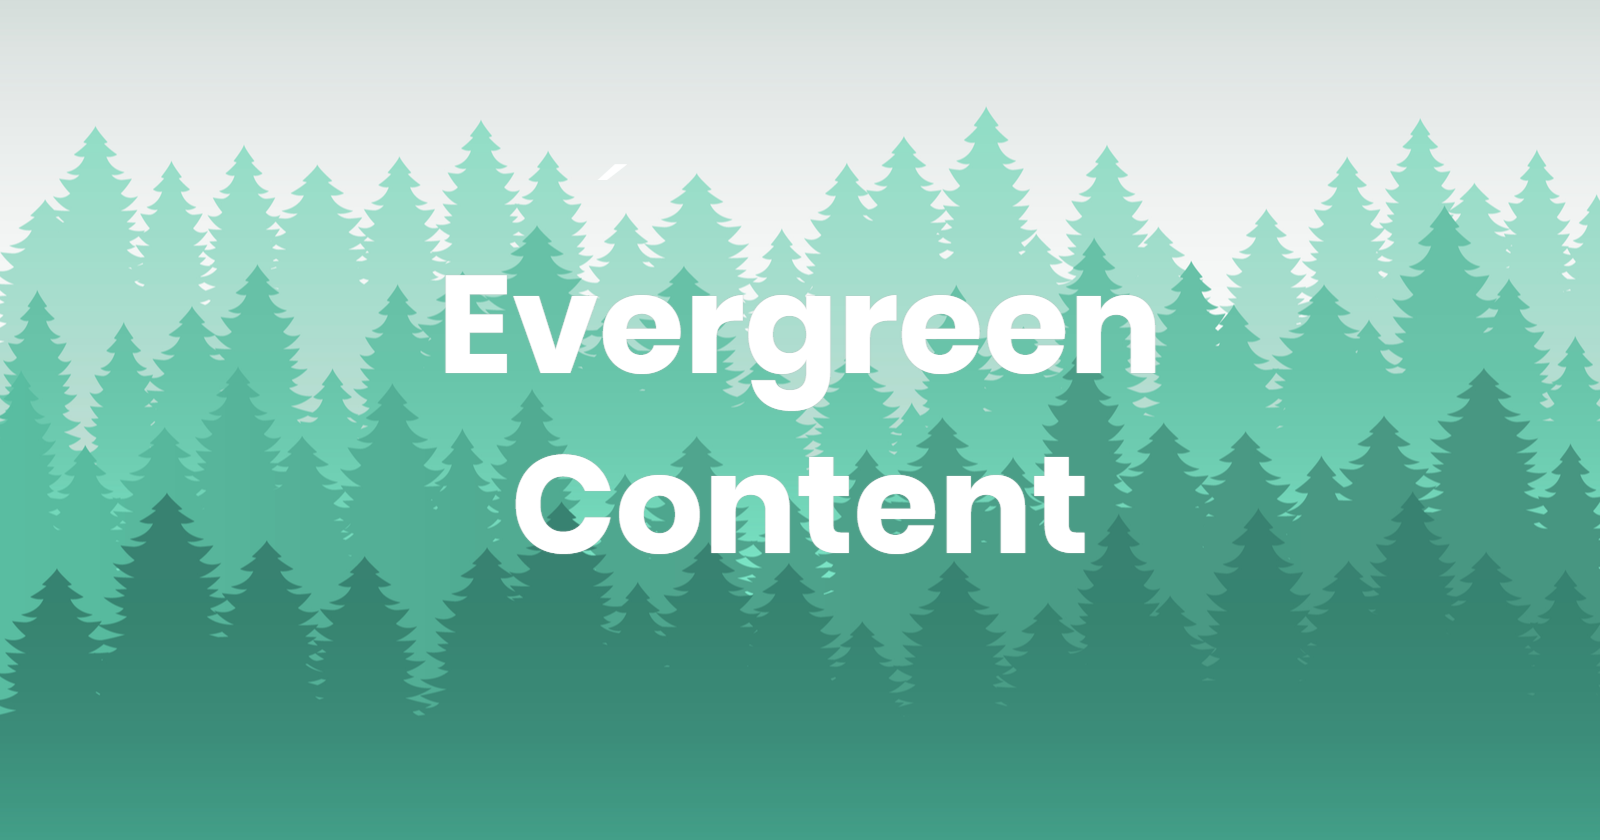 what-is-evergreen-content-why-should-you-care-5ecf4aaa871bc.png